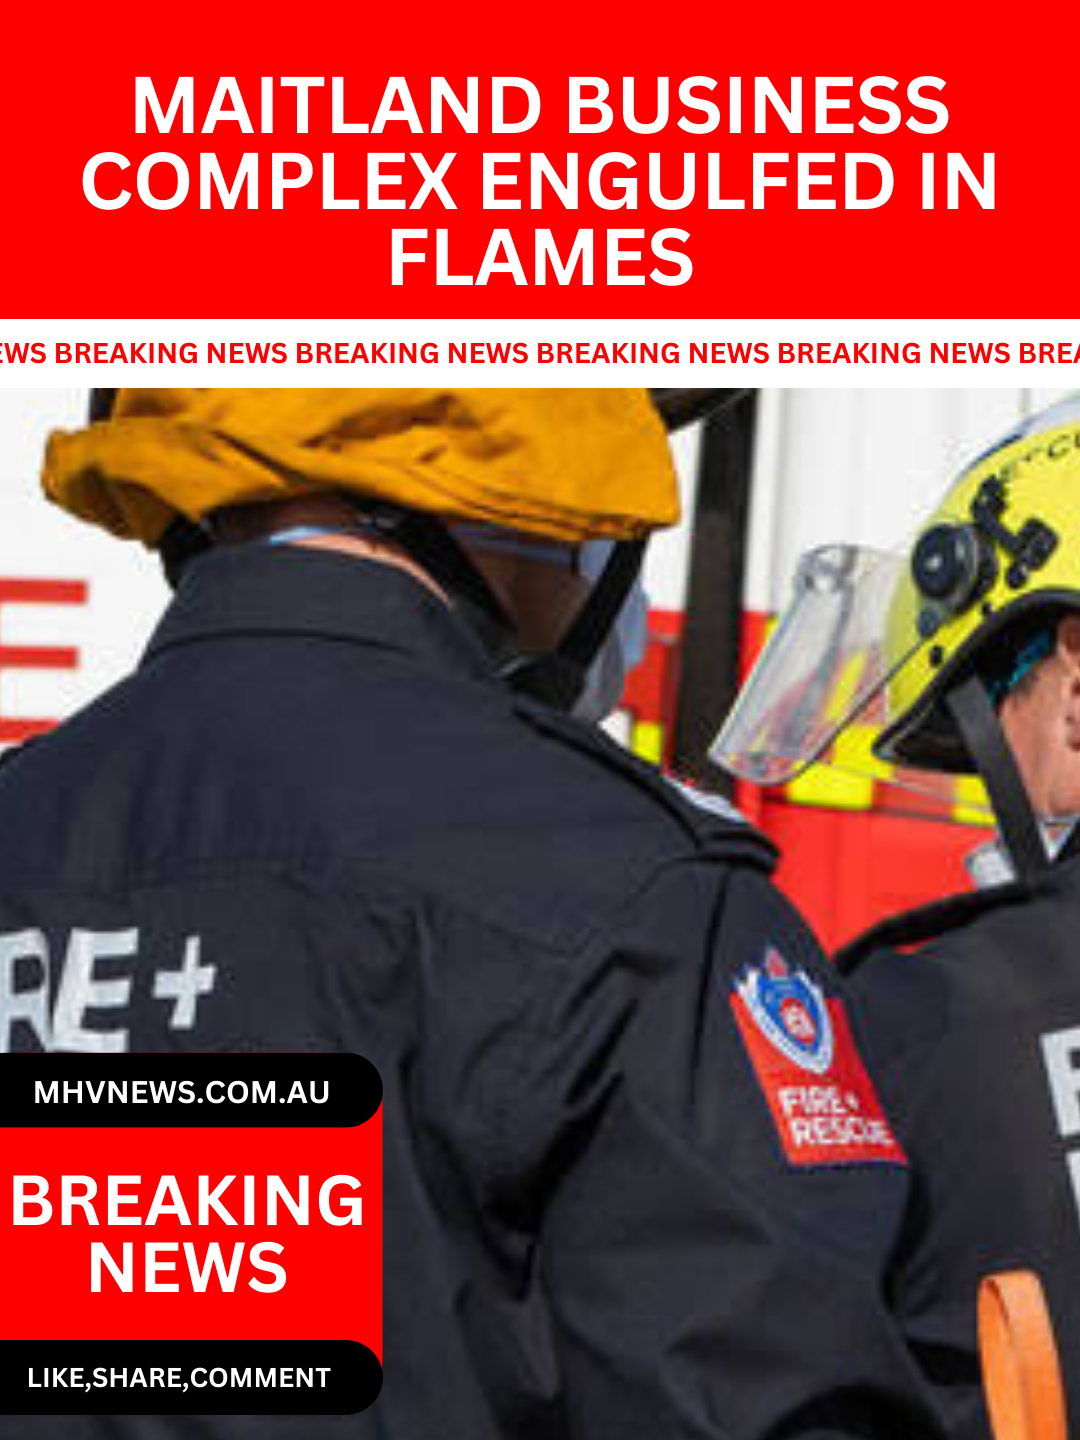 You are currently viewing Breaking News: Maitland Business Complex Engulfed in Flames